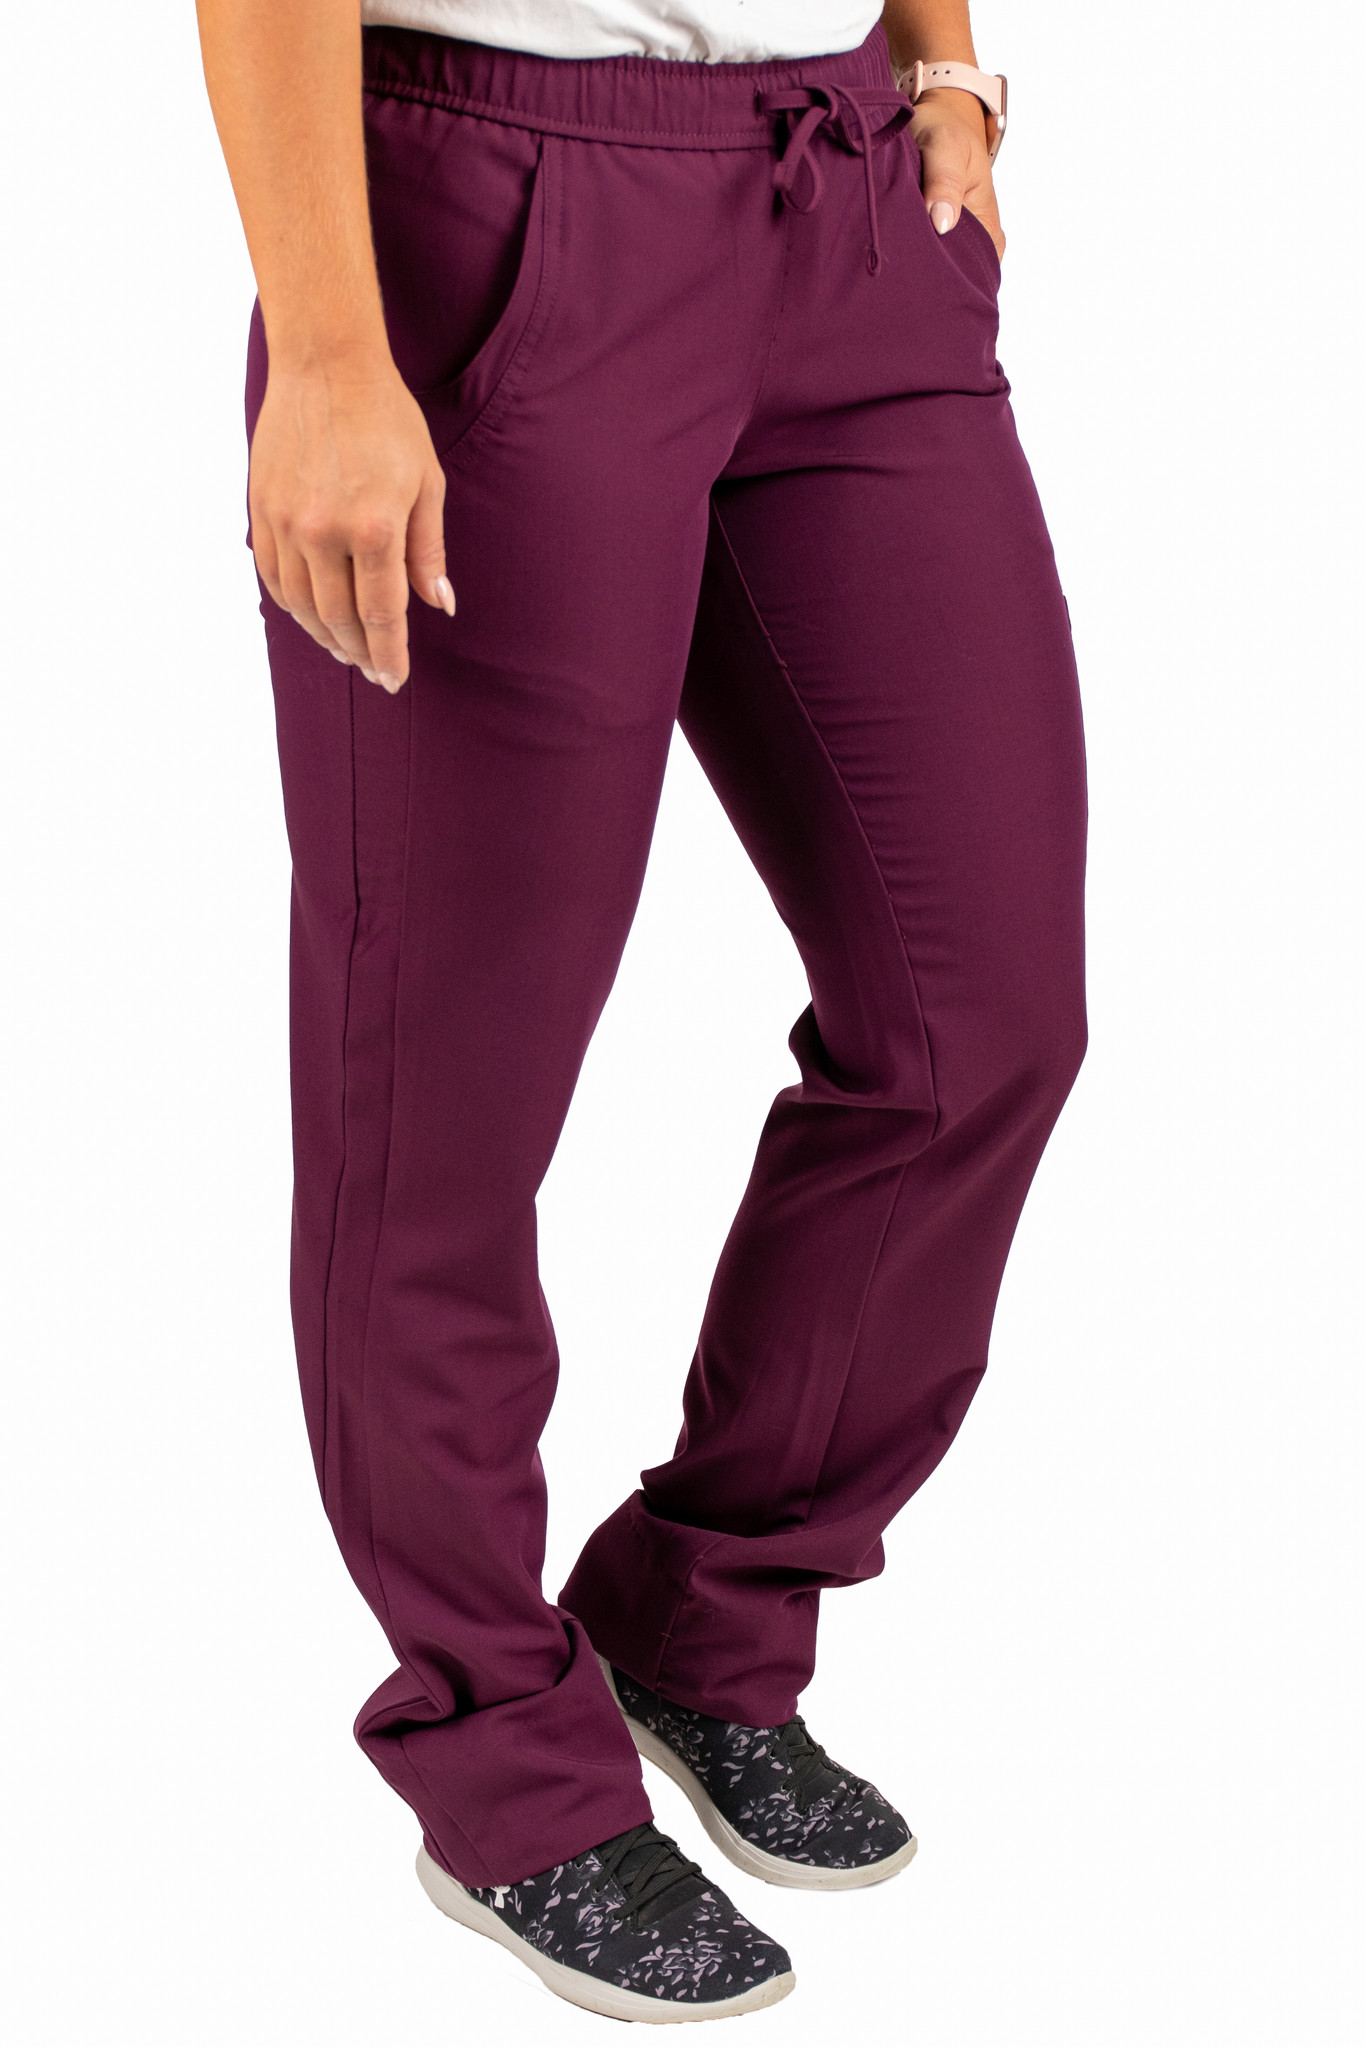 Burgundy Women's Drawstring Waistband Fitted Pants 960